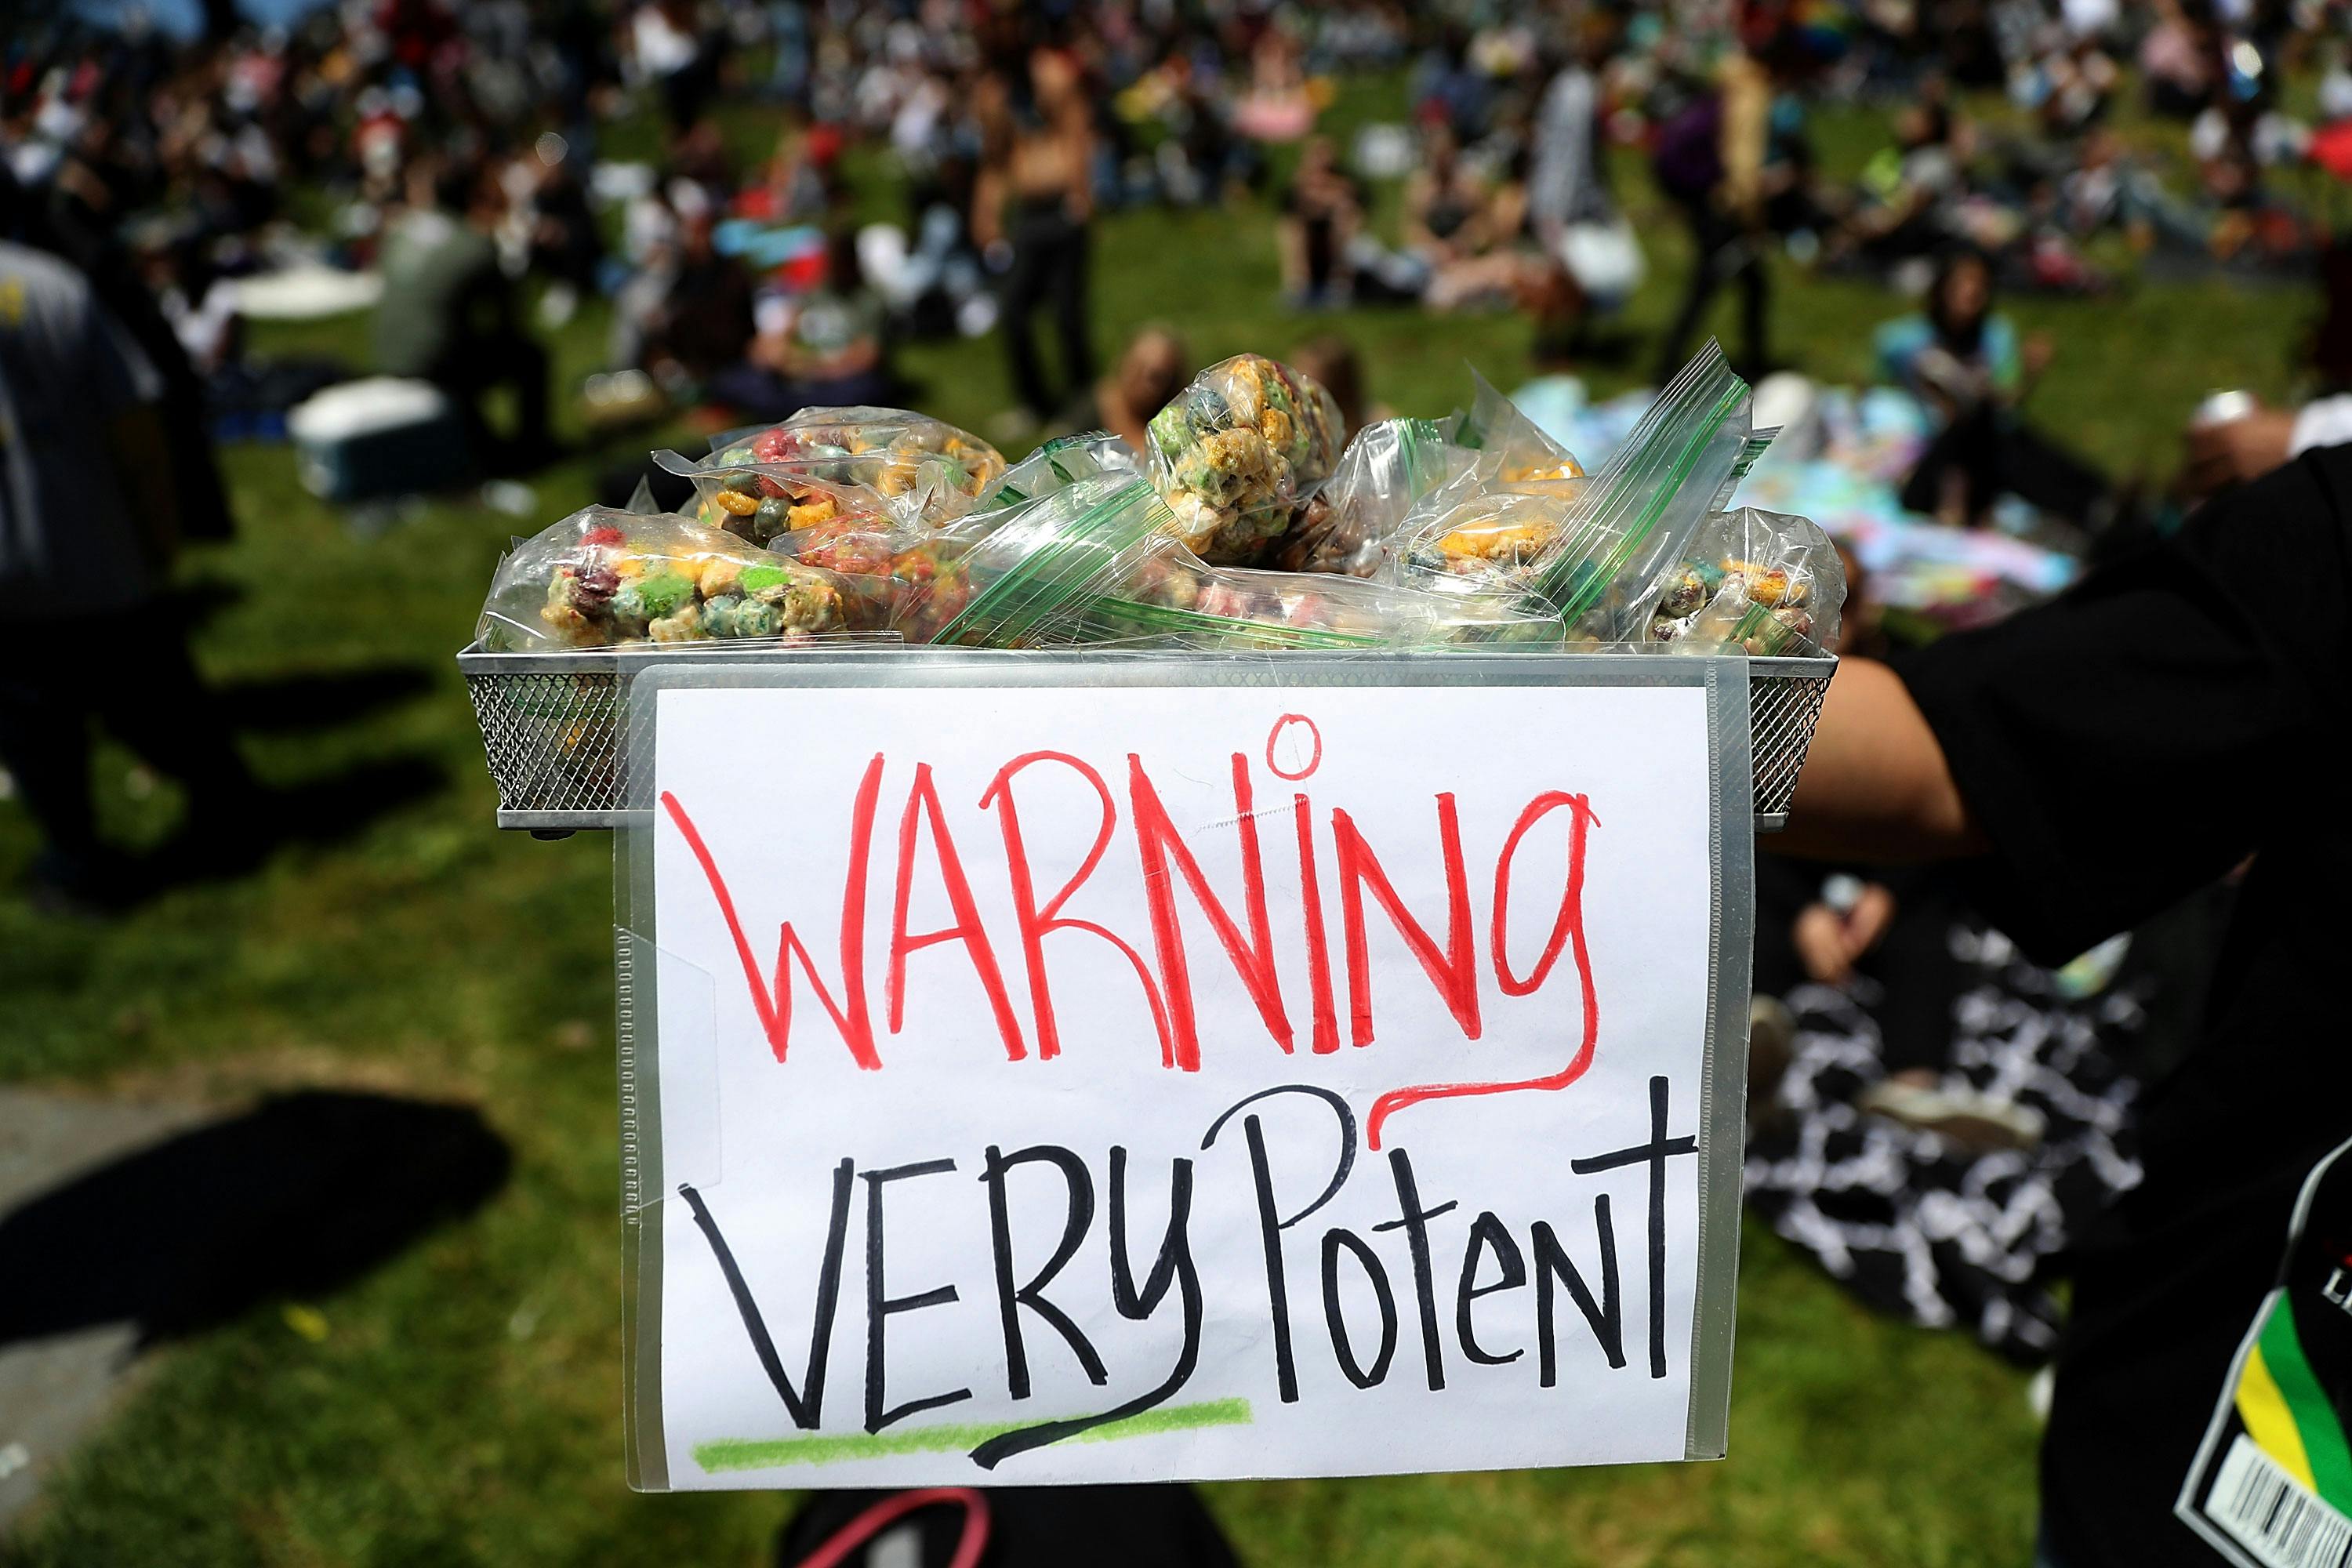 Canada Finally Legalized But A Big Question Remains Are Edibles Legal In Canada  Canada Finally Legalized, But A Big Question Remains: Are Edibles Legal In Canada?